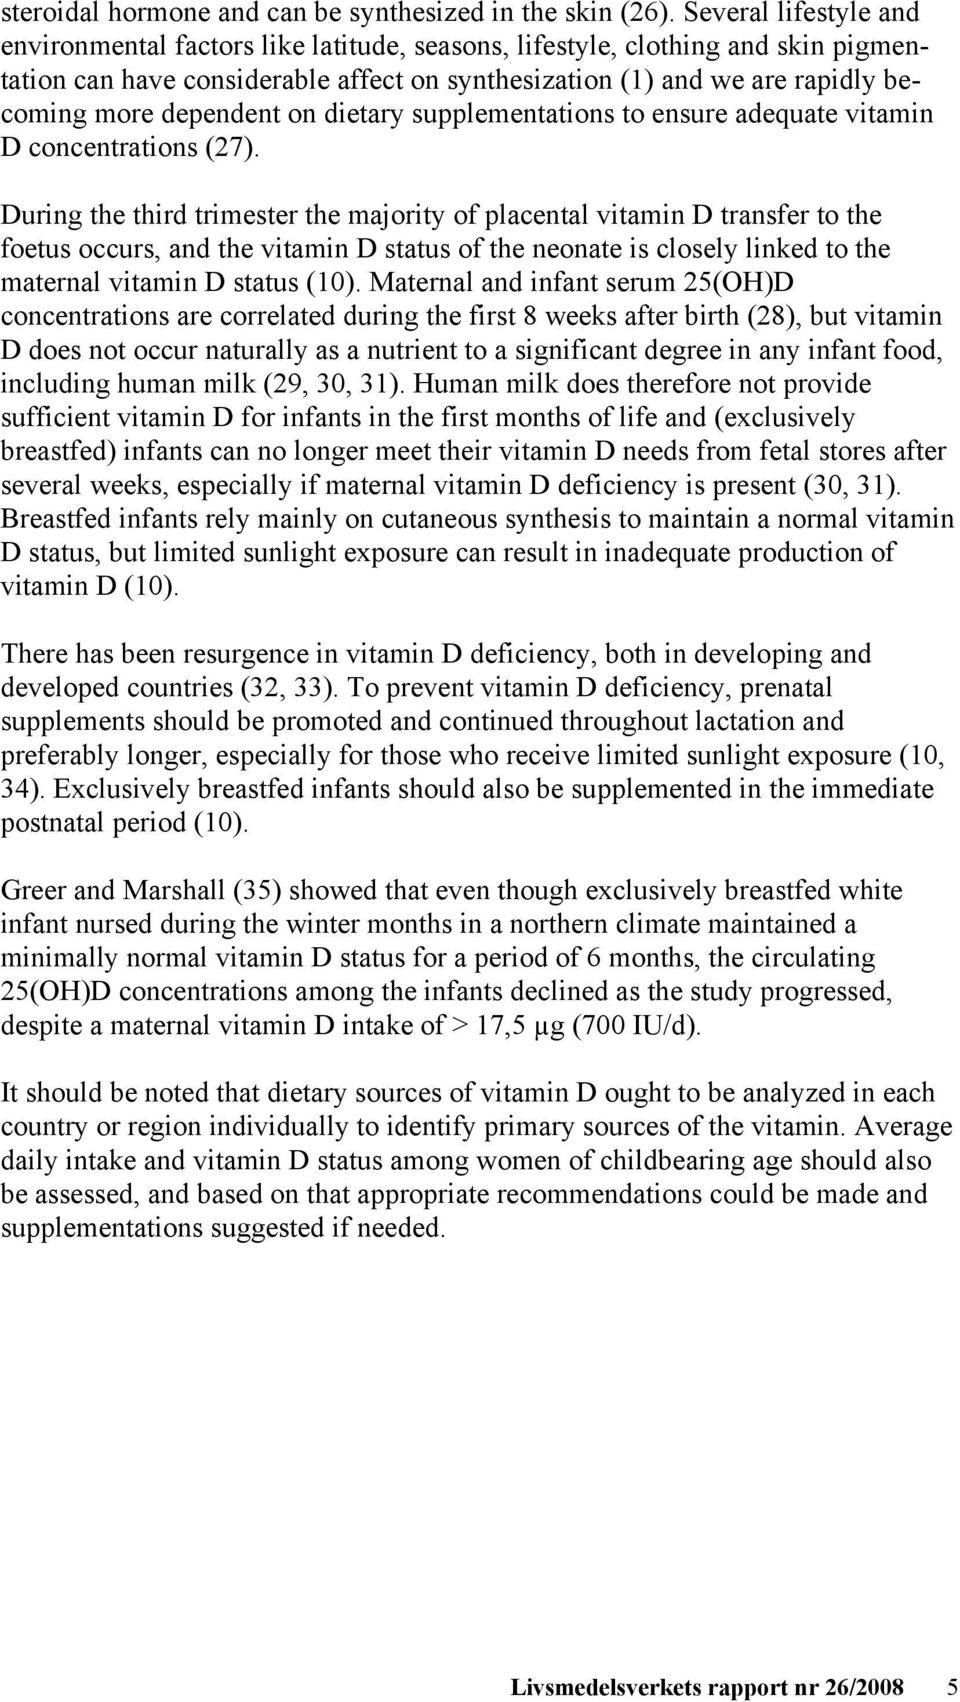 dependent on dietary supplementations to ensure adequate vitamin D concentrations (27).